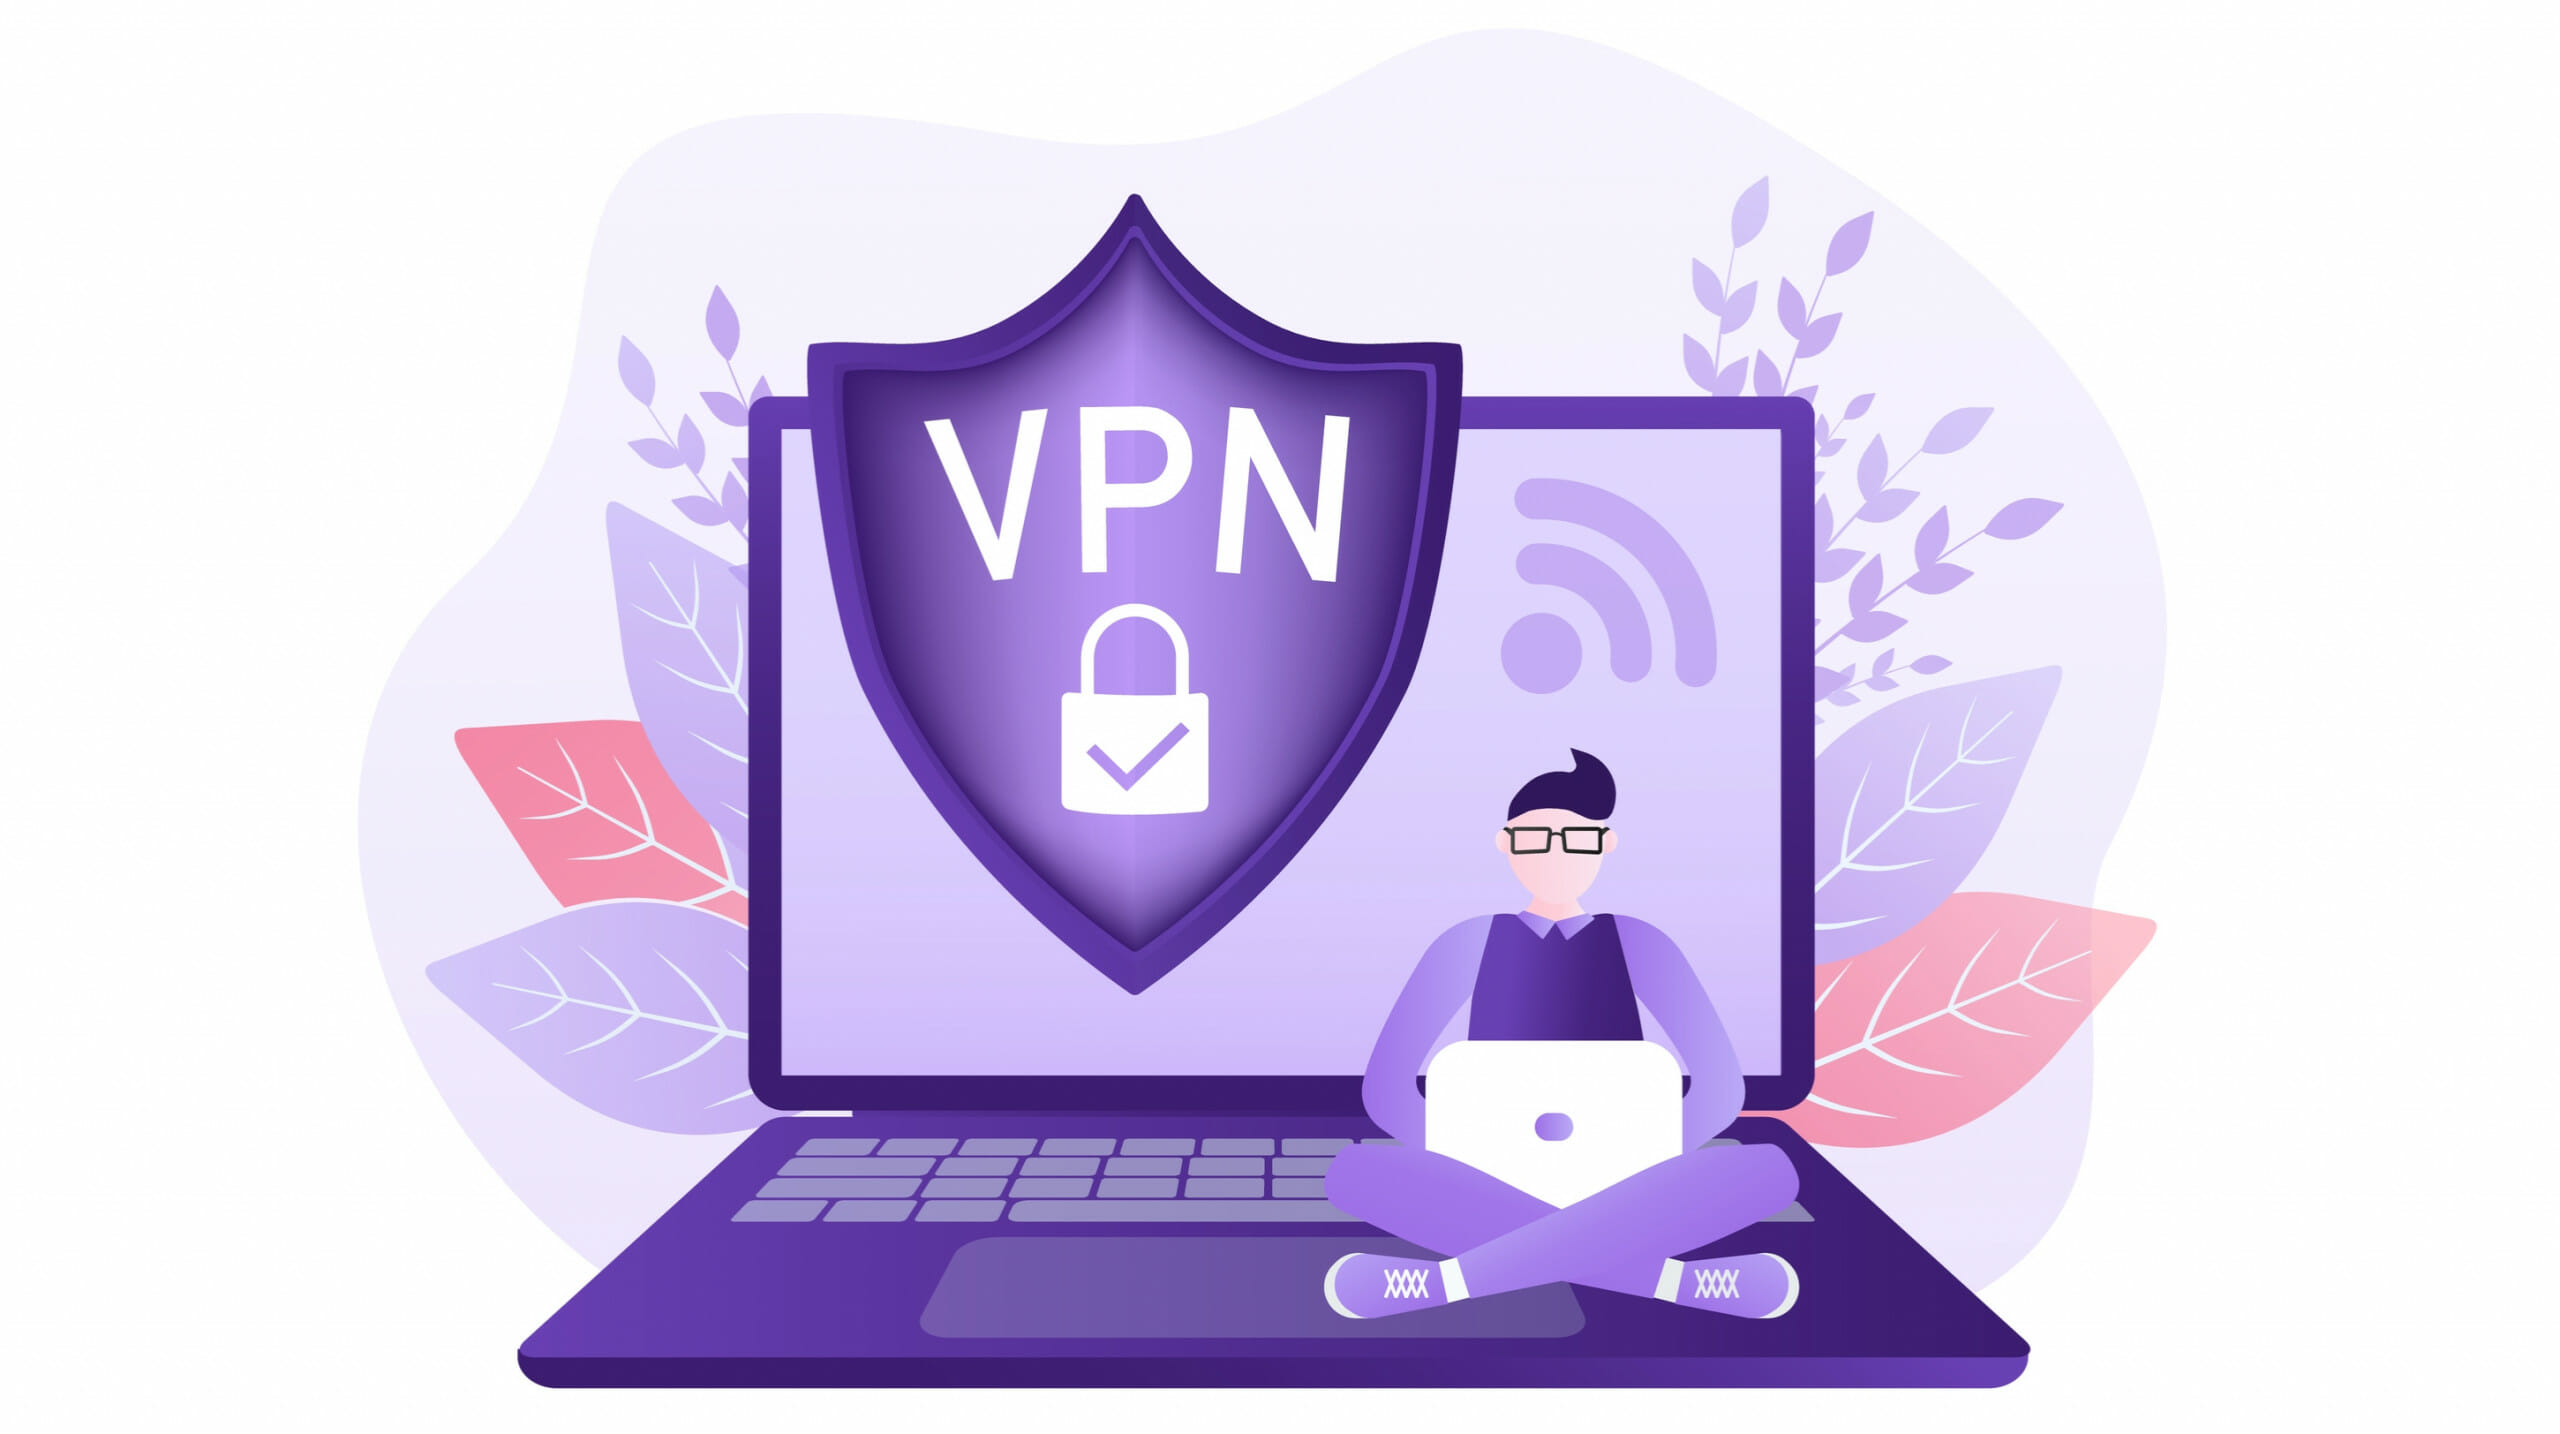 Use a VPN service for anonymous browsing